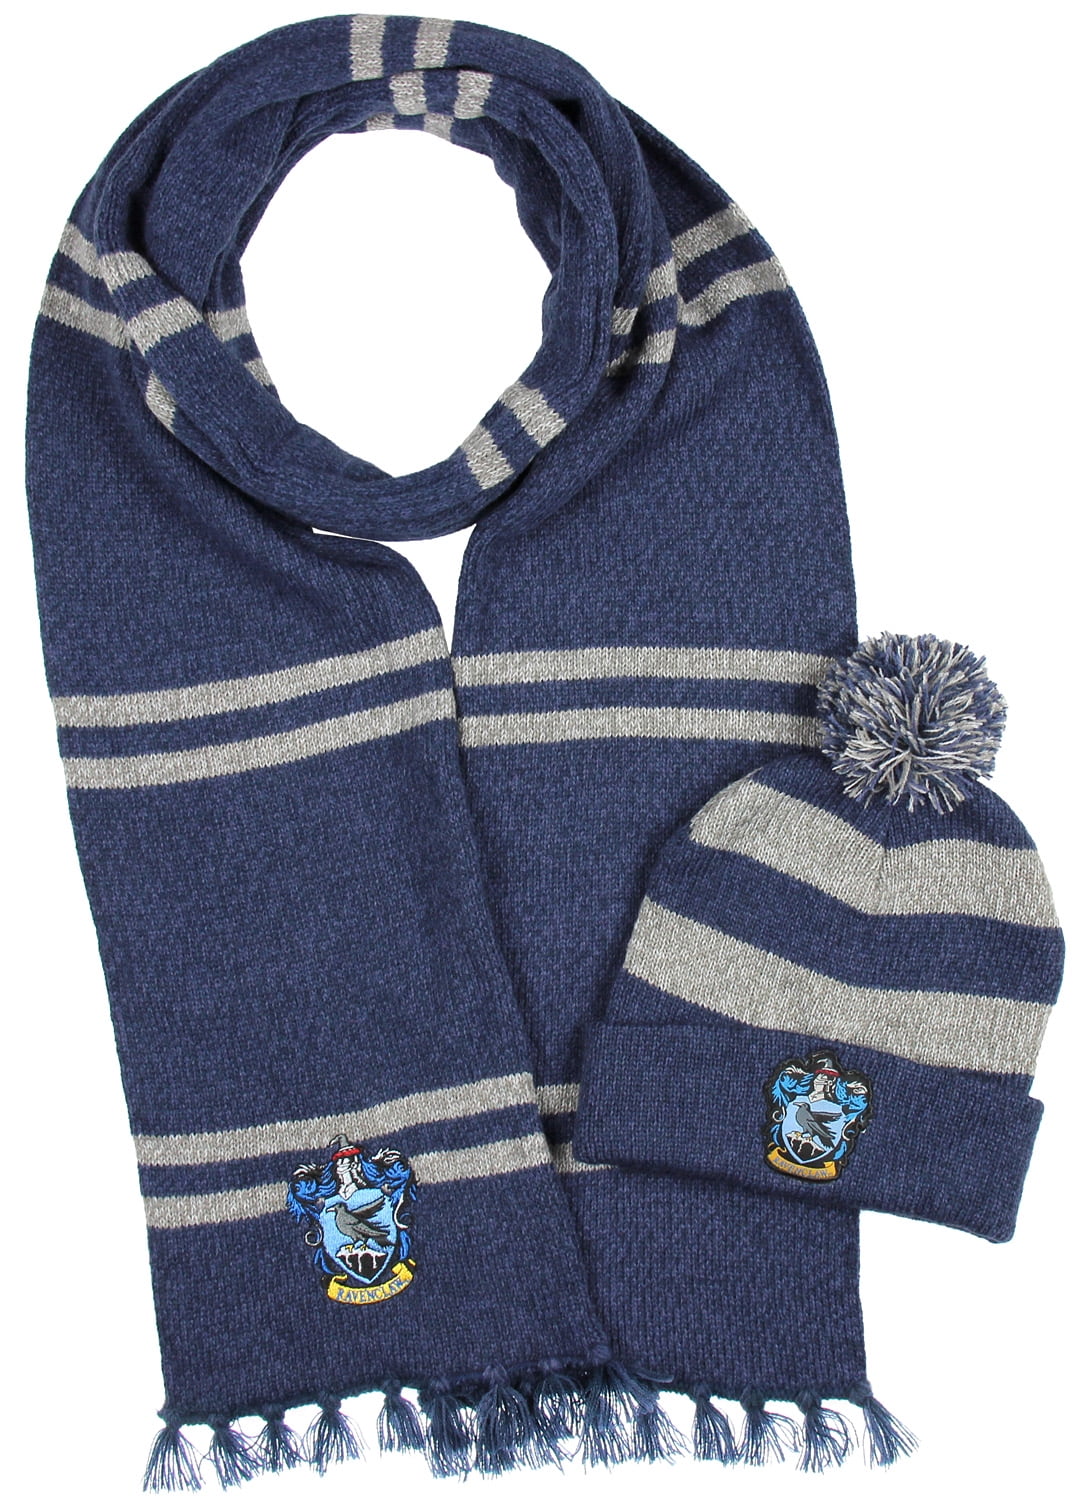 Harry Potter Knit Hat Scarf & Gloves In 3 House Hufflepuff Ravenclaw & Slytherin 